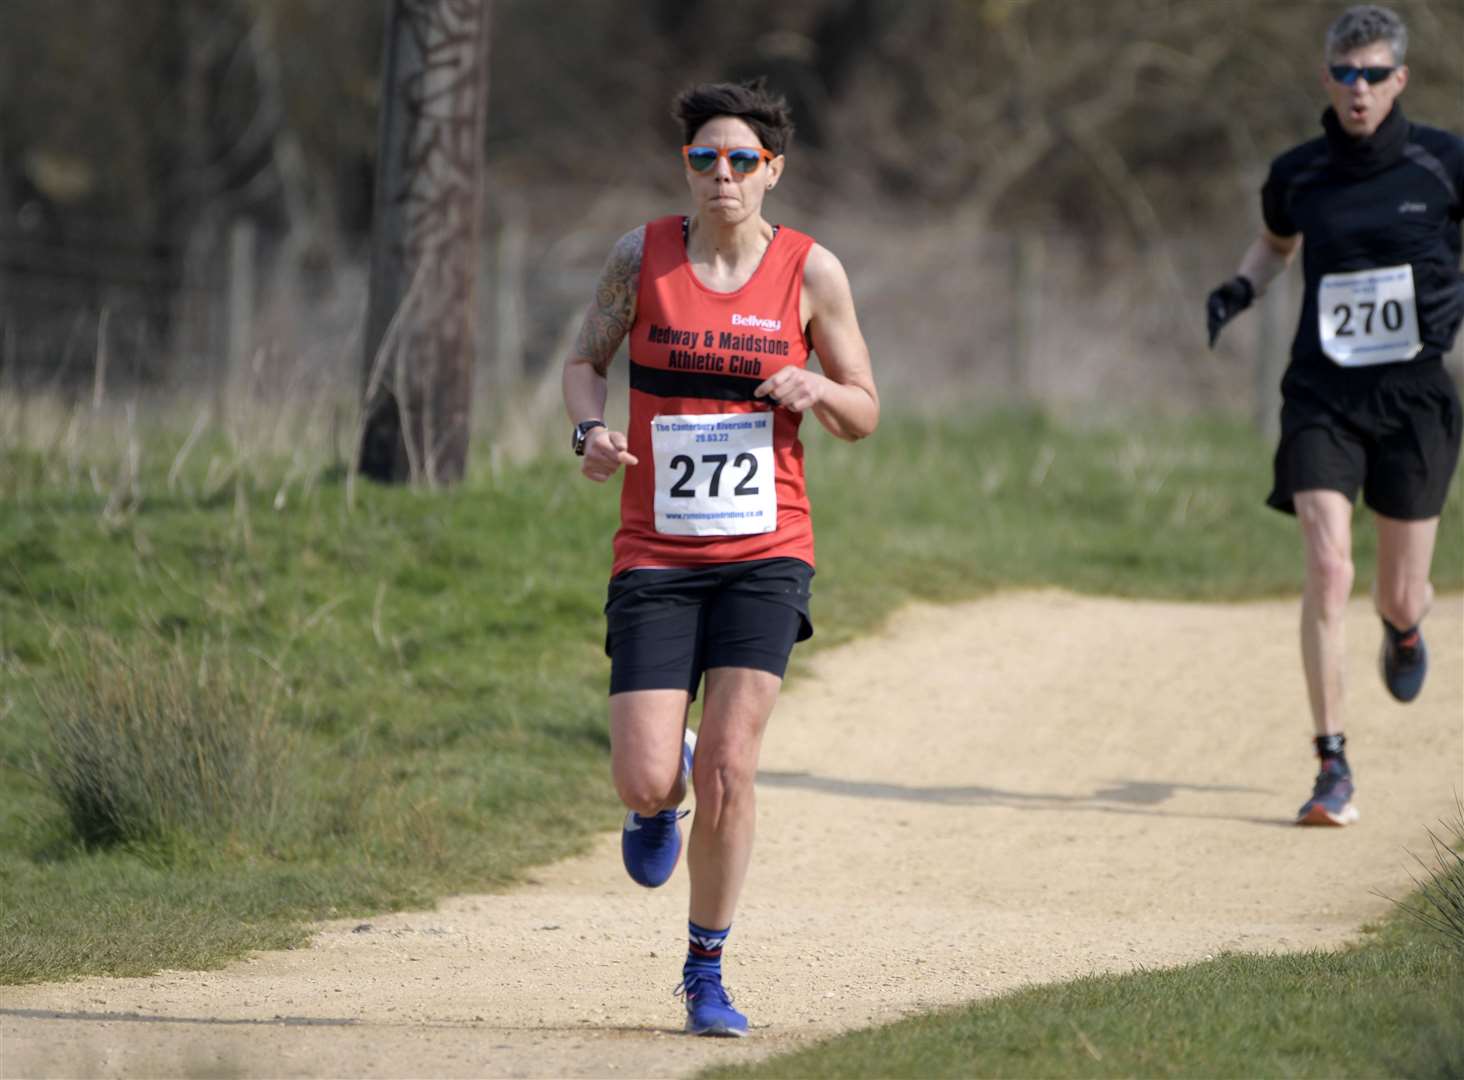 Jemma Whyman, of Medway & Maidstone AC, was second female back in 16th. Picture: Barry Goodwin